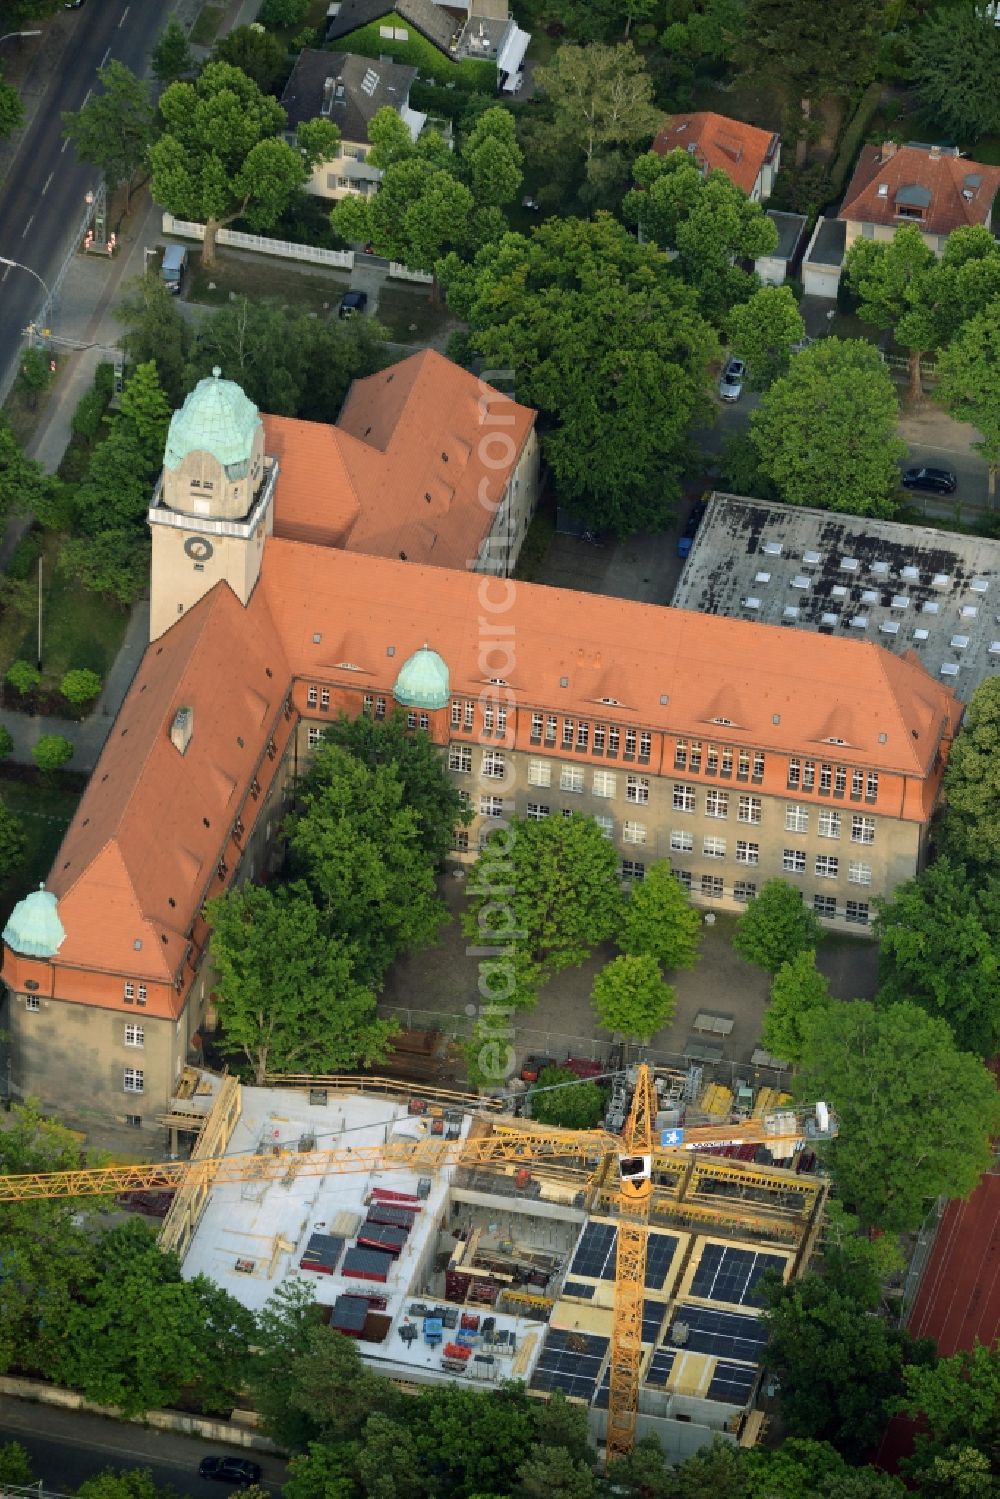 Aerial image Berlin - School grounds, building complex and construction works at Arndt-Gymnasium Dahlem in the district of Steglitz-Zehlendorf in Berlin in Germany. A new building is being developed next to the historic main building with the red roof, small towqer and green dome